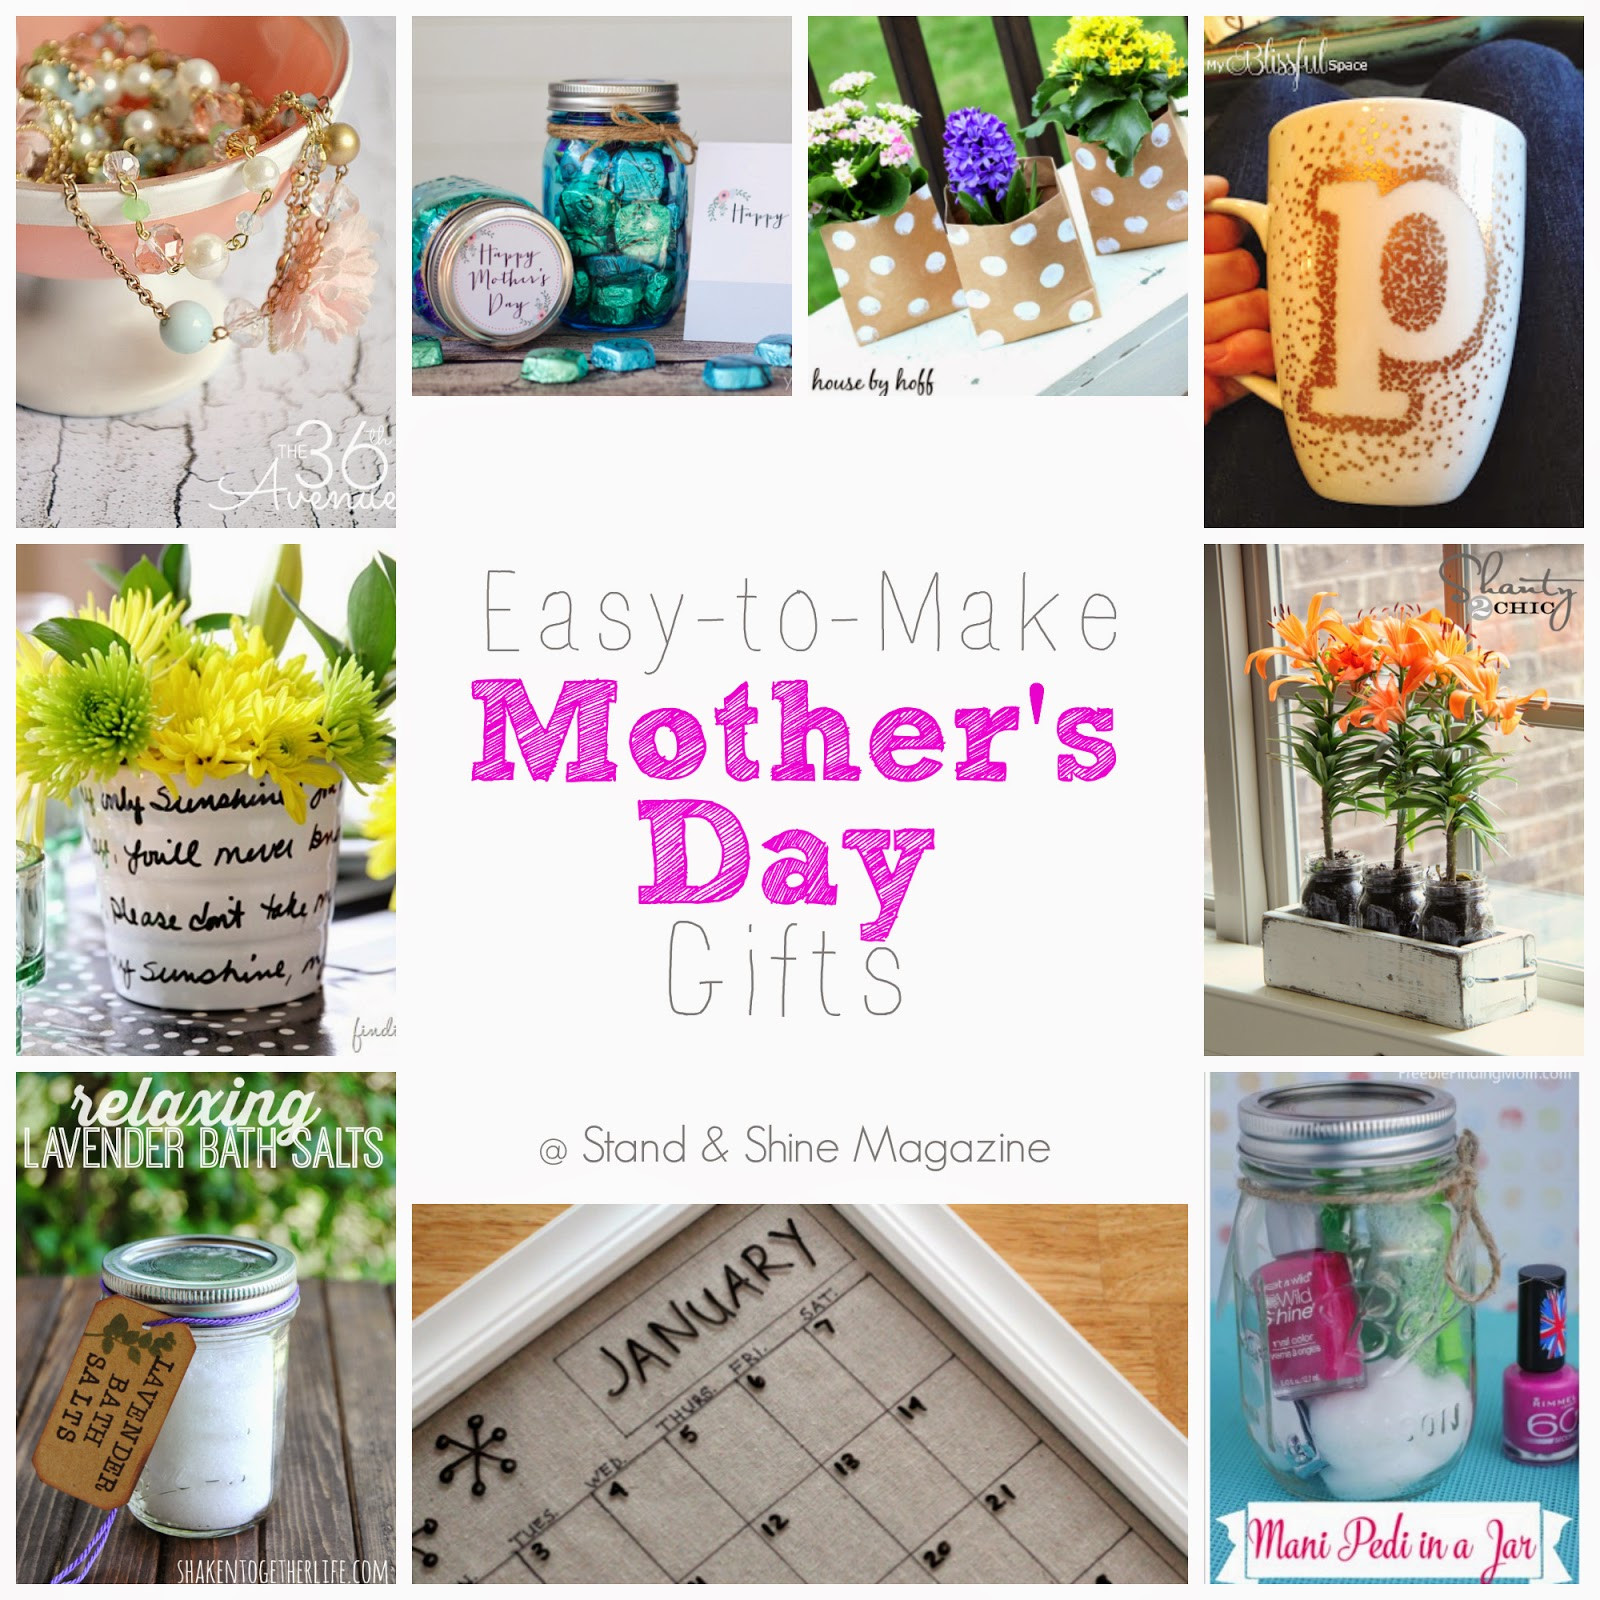 Making Mothers Day Gifts
 Stand & Shine Magazine Easy To Make Mother s Day Gifts